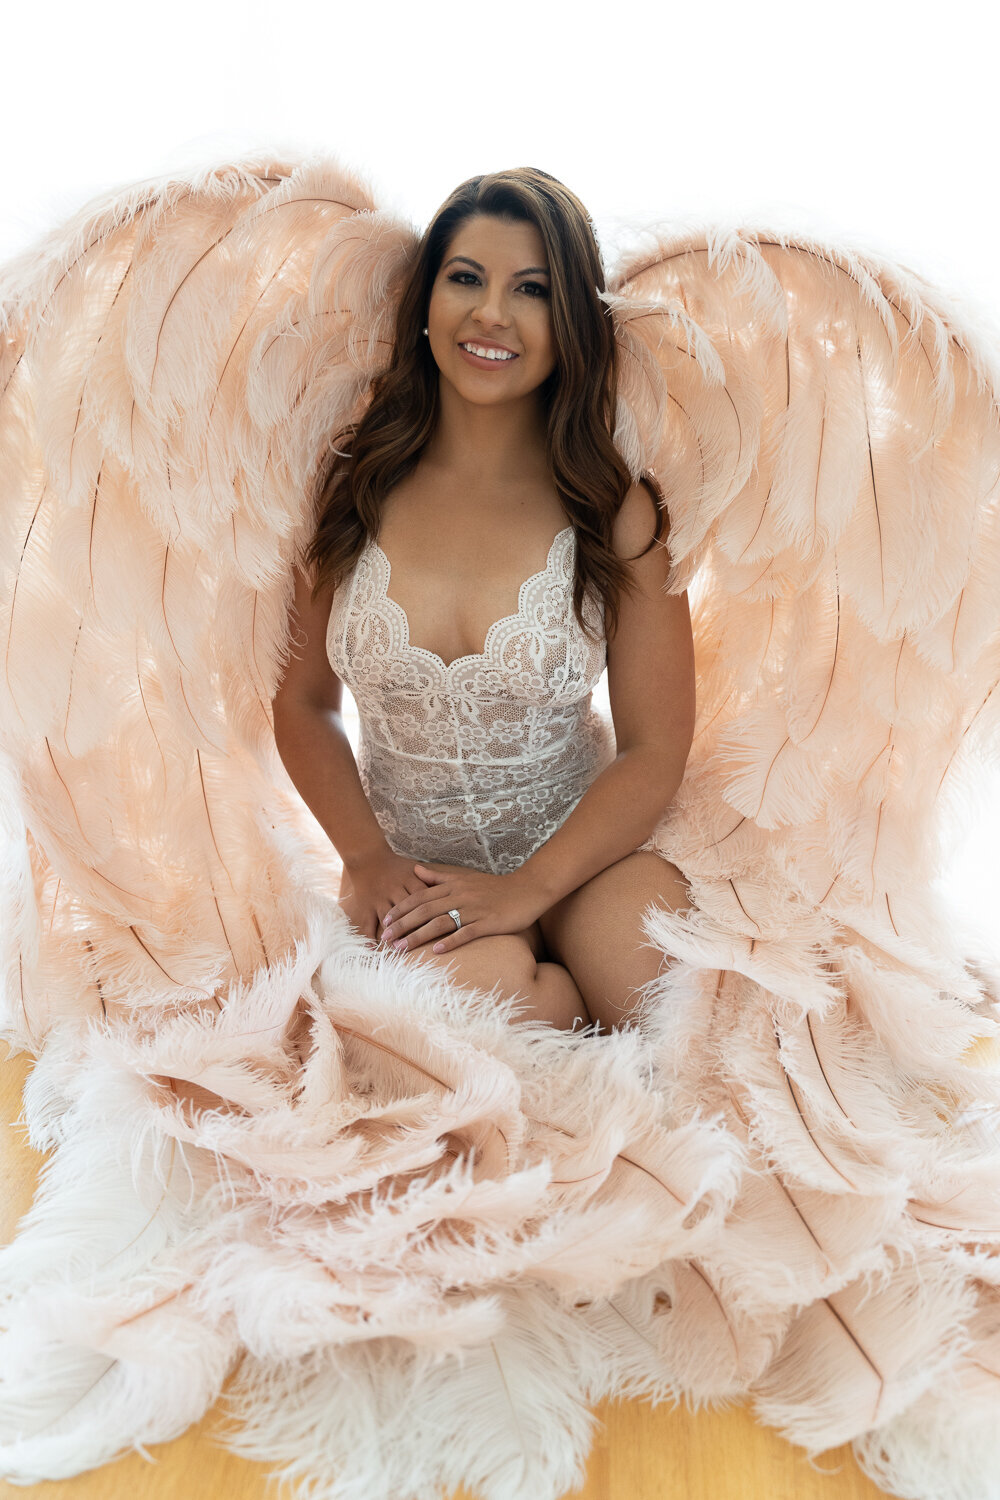 A radiant woman sits confidently on a bed in a Bay Area boudoir studio, adorned with large, plush feathered wings in a soft peach hue, complementing her lace bodysuit. Her joyful smile and the elegant wings create a celestial atmosphere